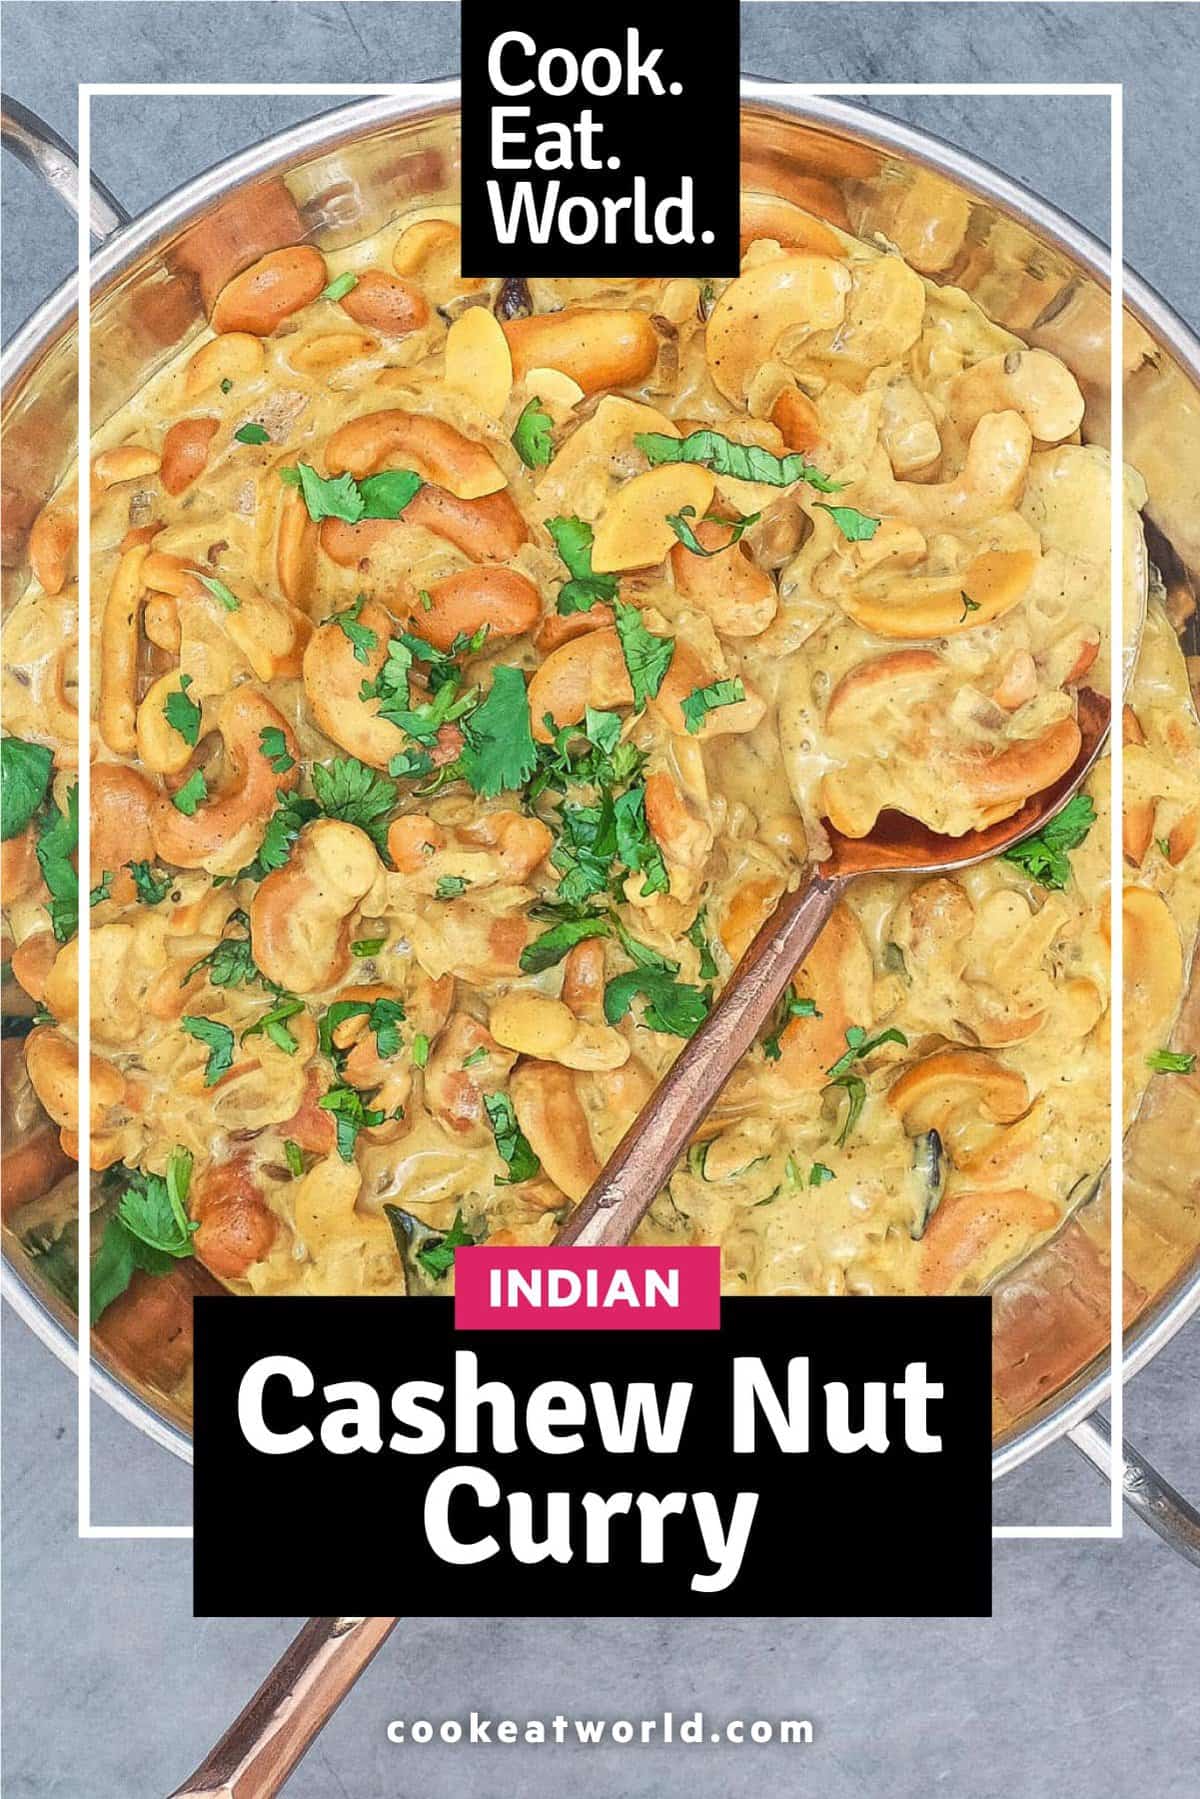 Cashew Nut Curry in a silver bowl